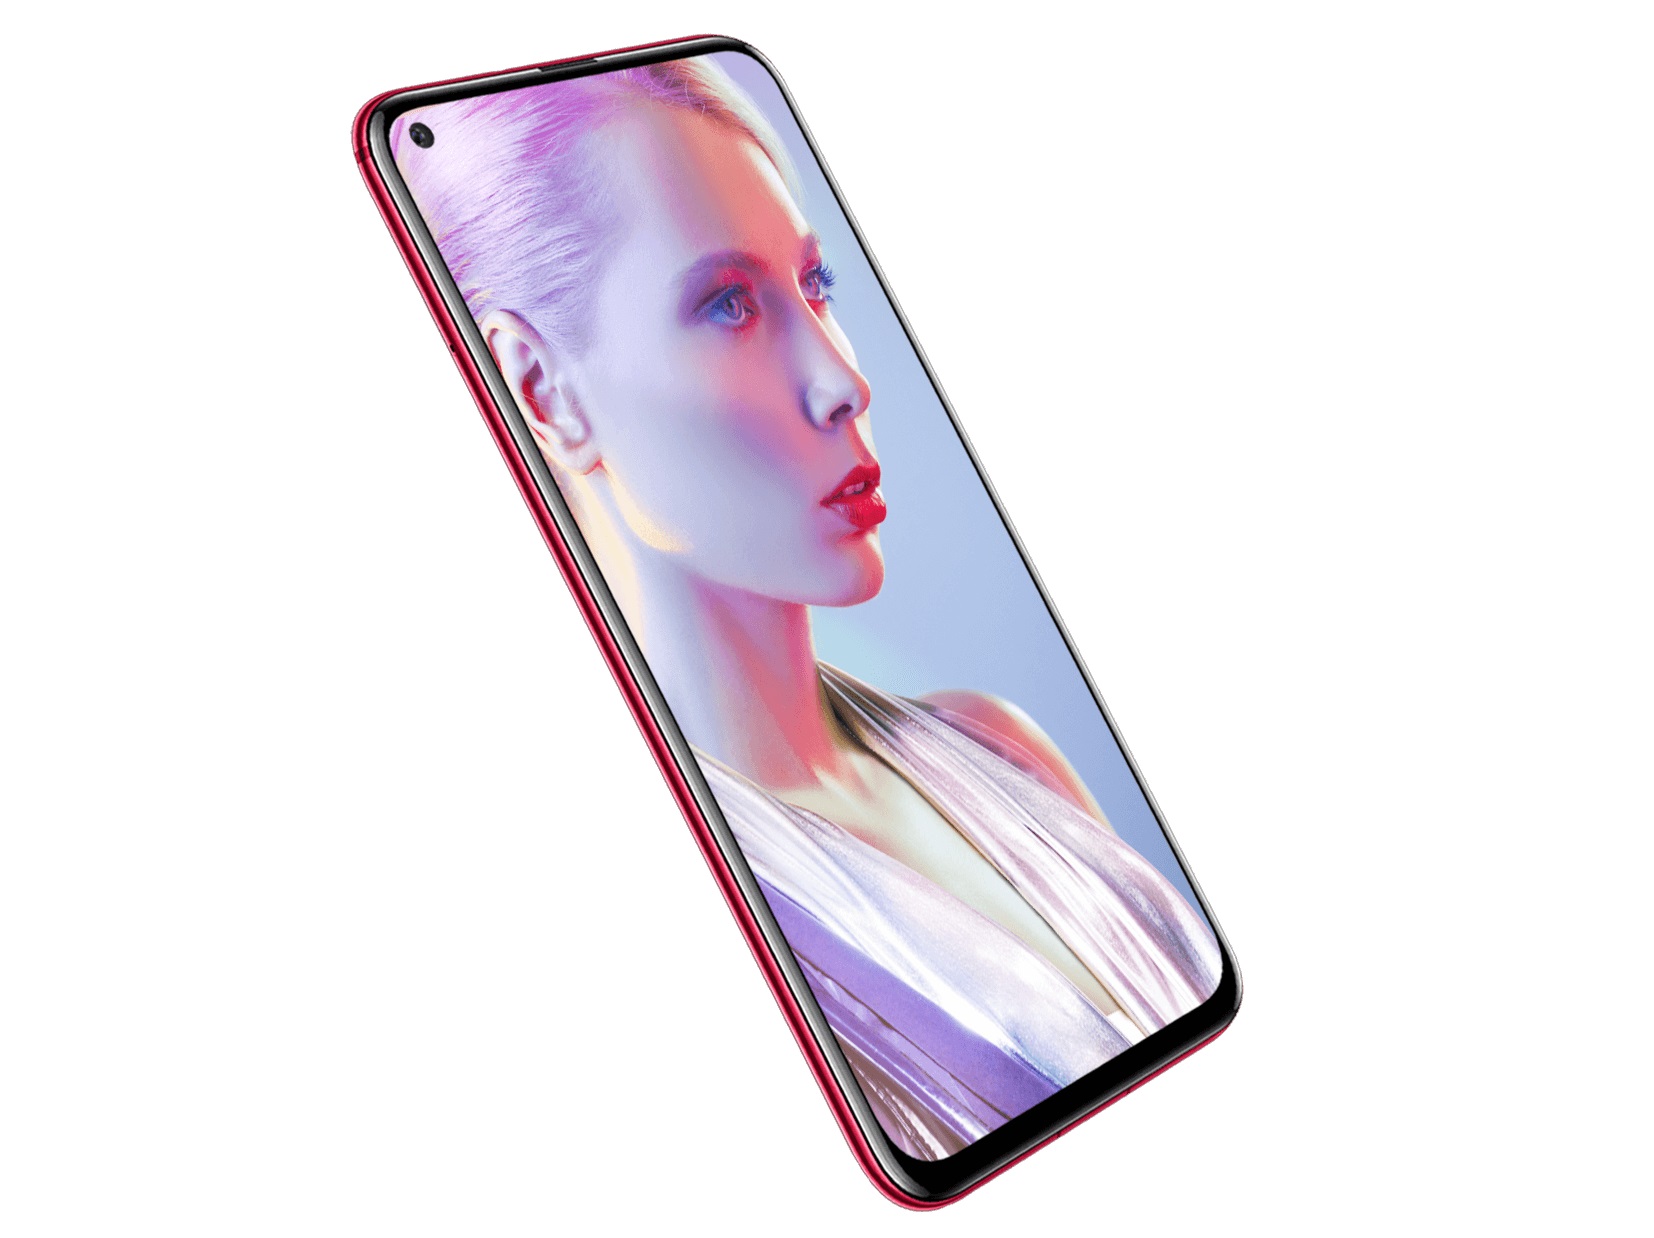 The Huawei Nova 4 smartphone in red from the front.